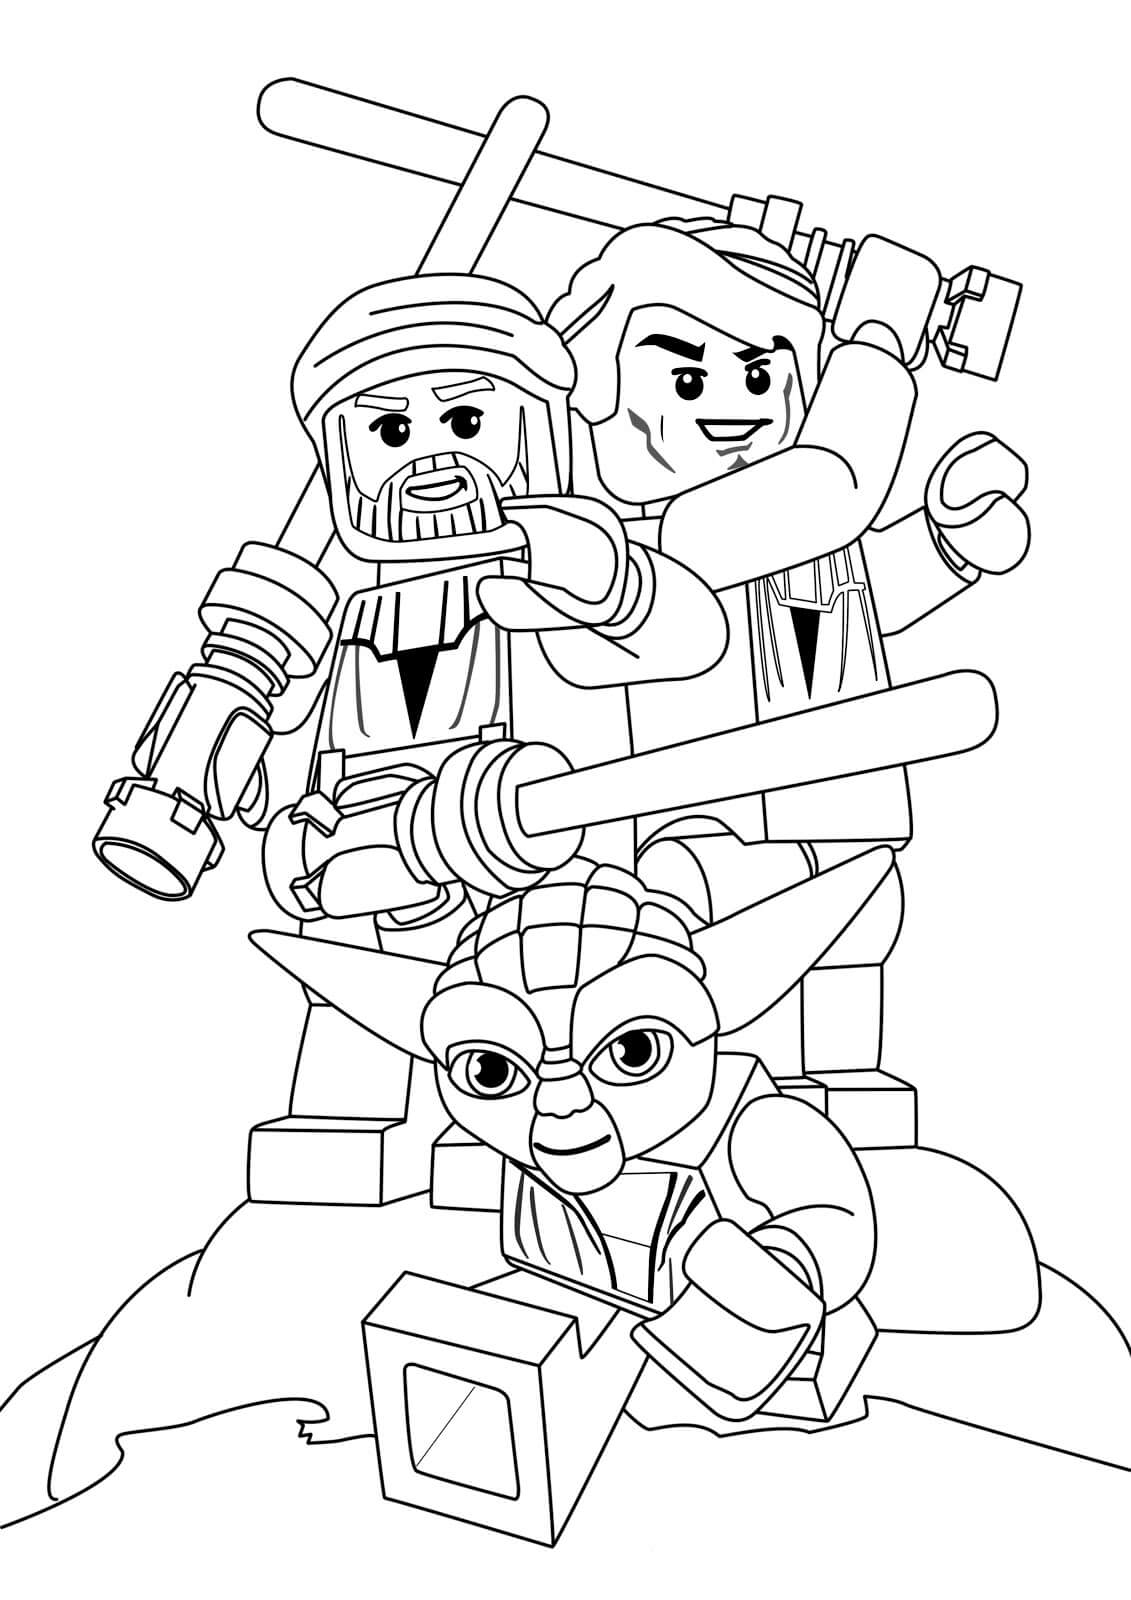 Lego Star Wars Characters Coloring Page